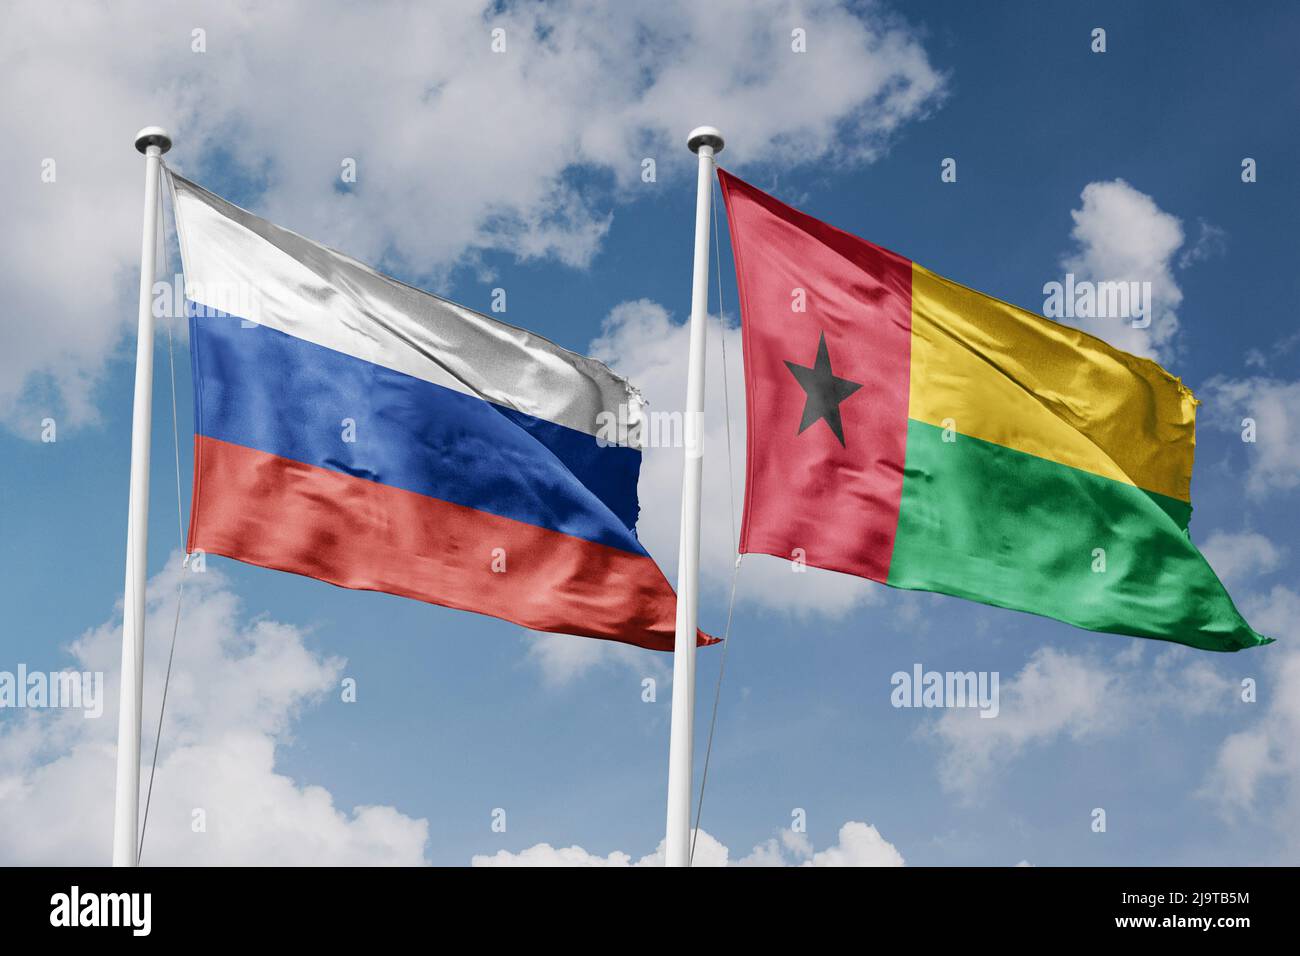 Russia and Guinea-Bissau two flags on flagpoles and blue cloudy sky background Stock Photo